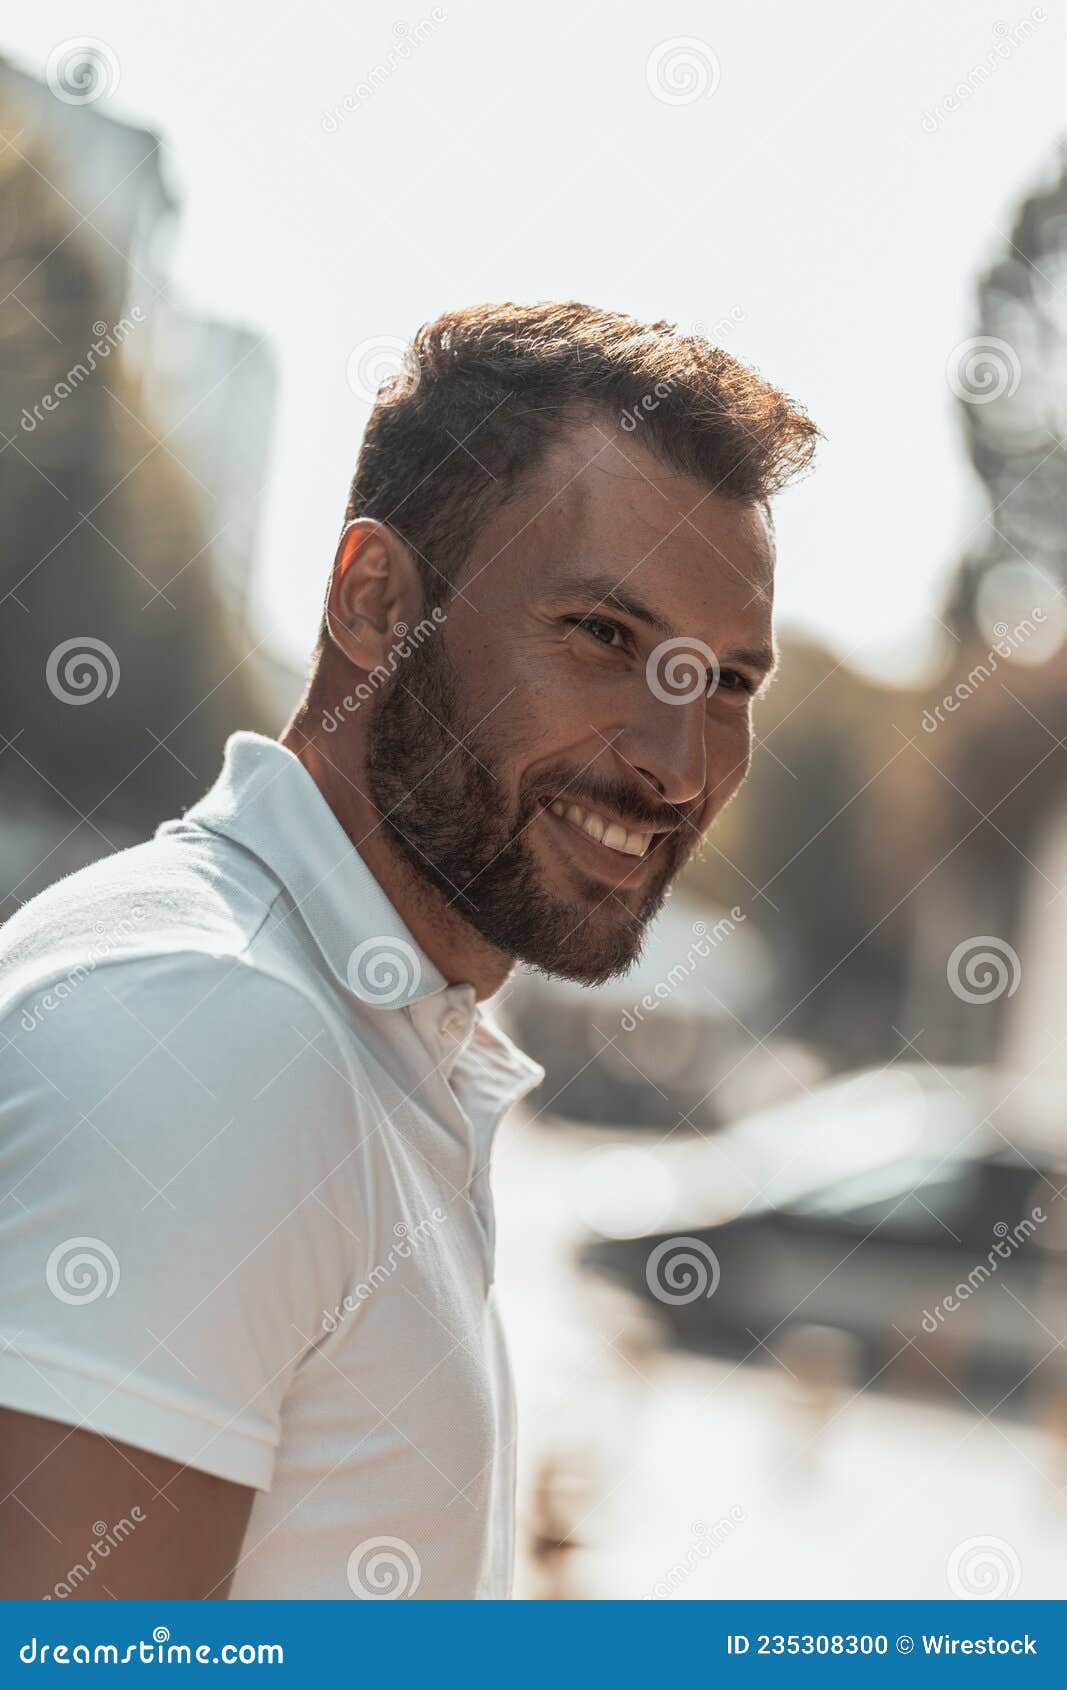 Cool and Attractive Slovenian Man Smiling while Looking at Something ...